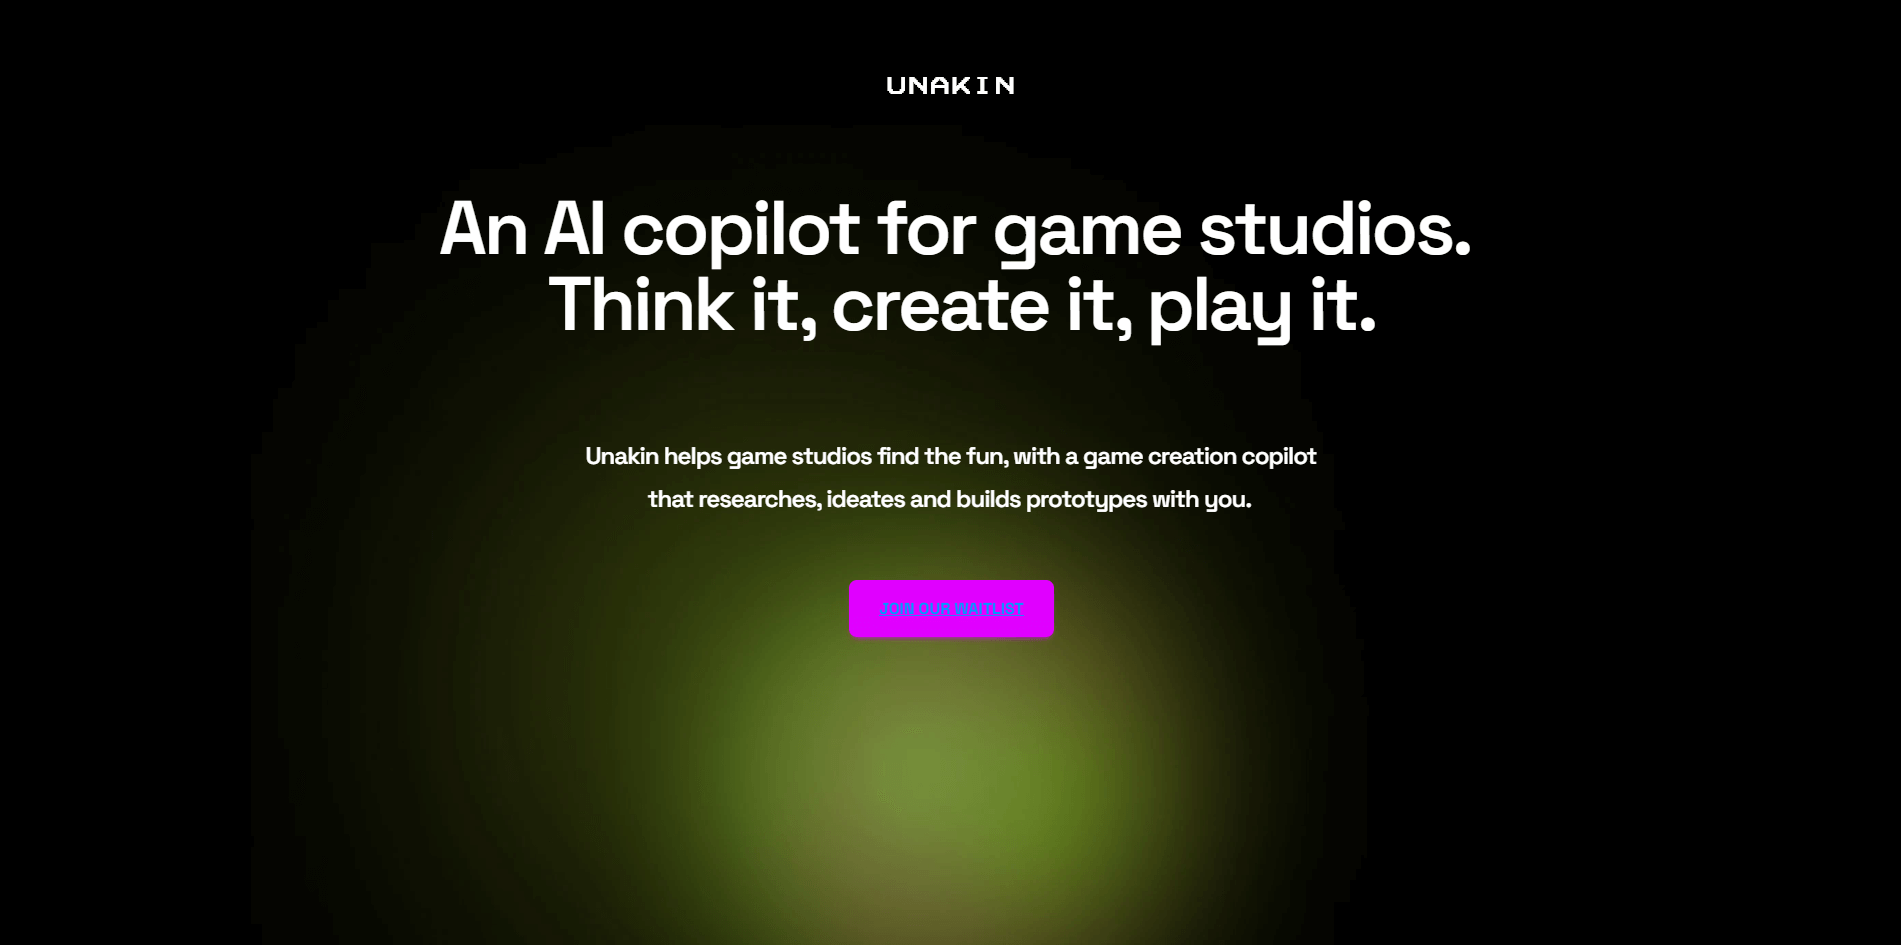 unakin.ai | An AI copilot for game studios. Think it, create it, play it.